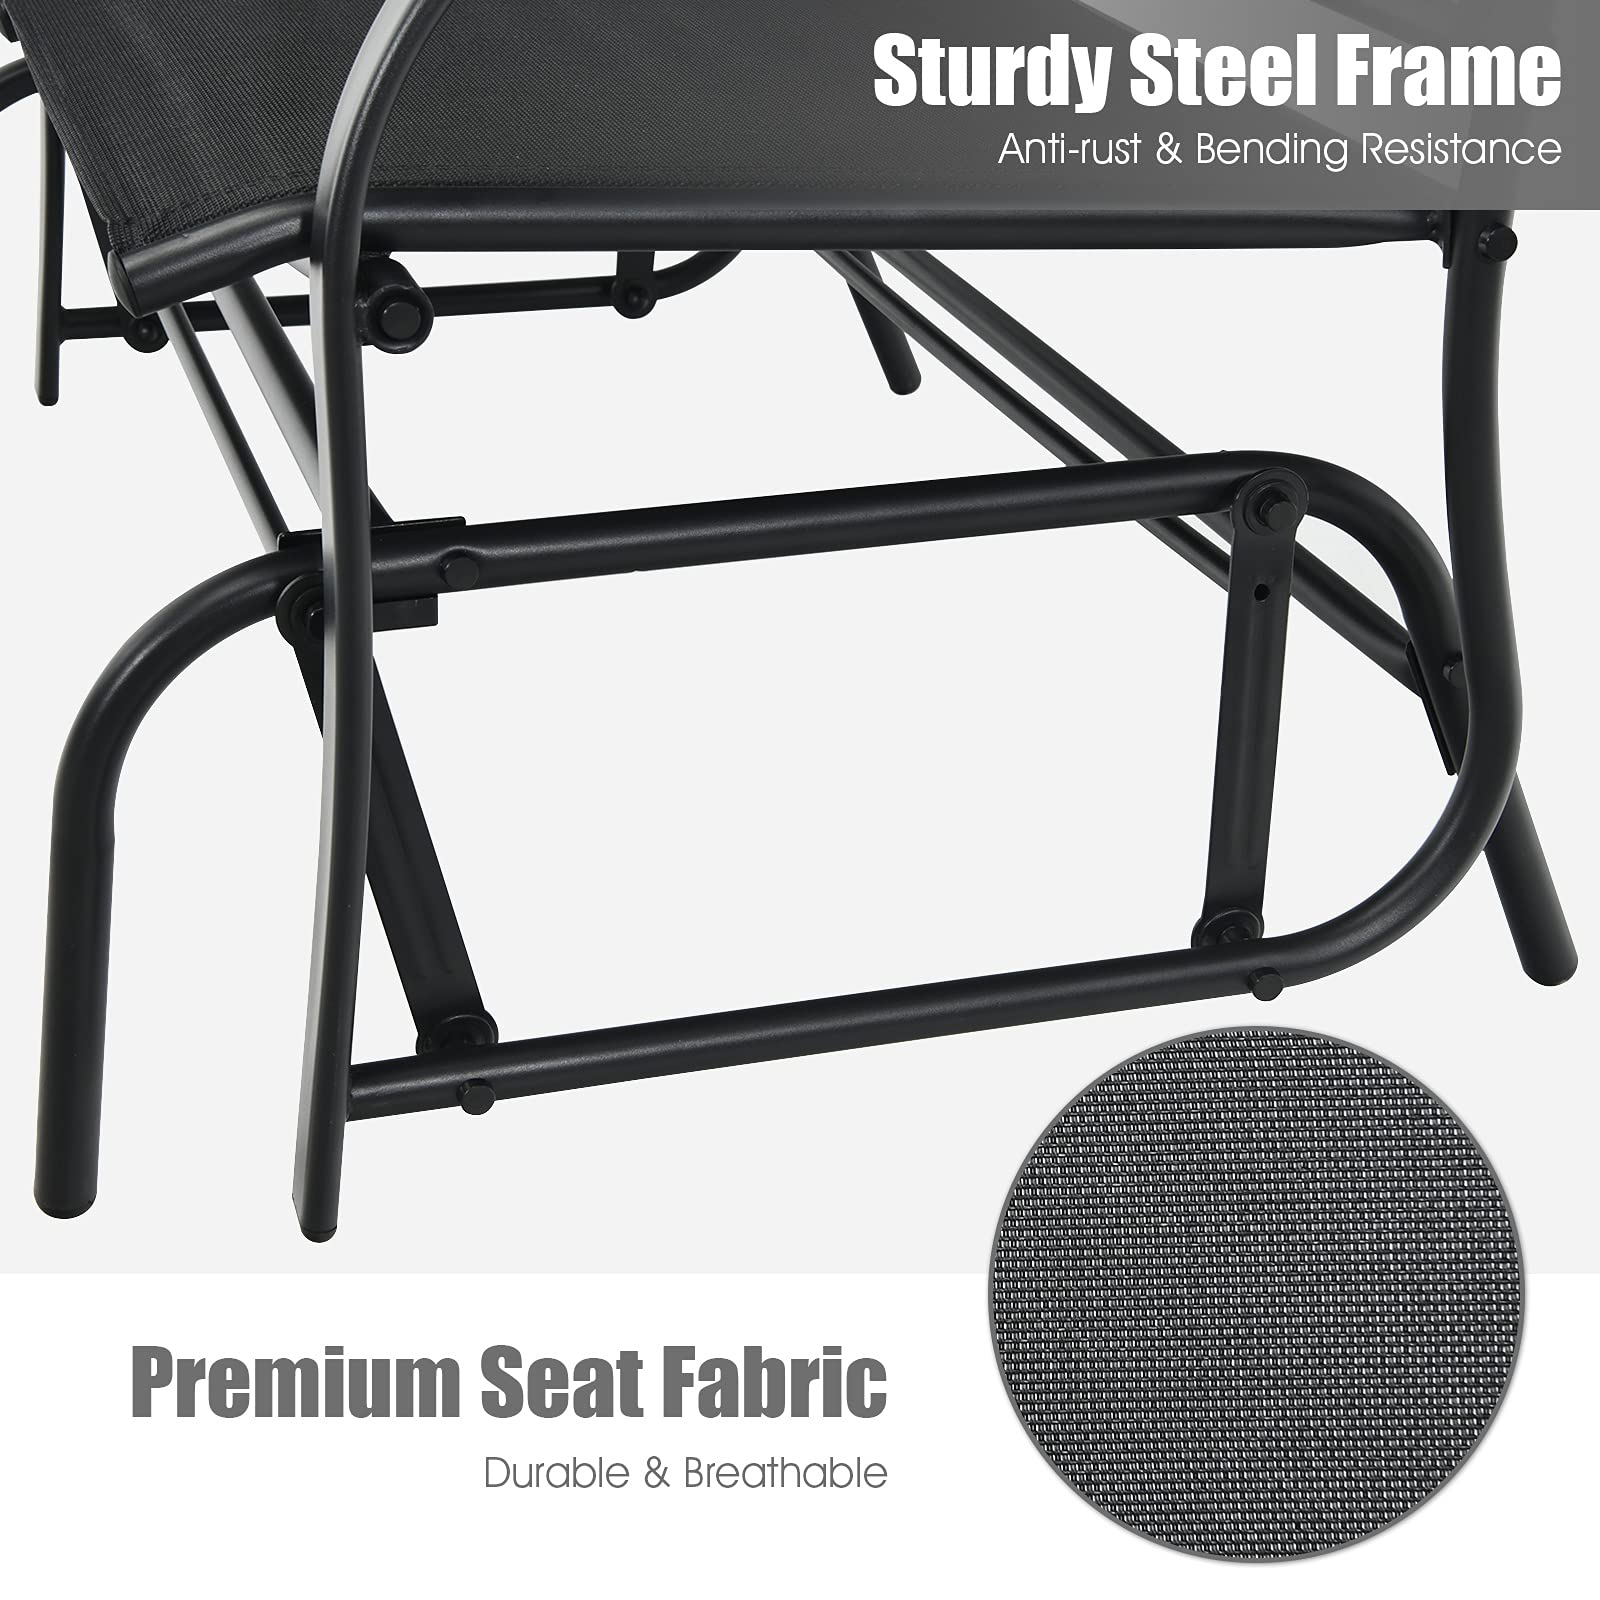 Giantex Patio Glider Stable Steel Frame for Outdoor Backyard